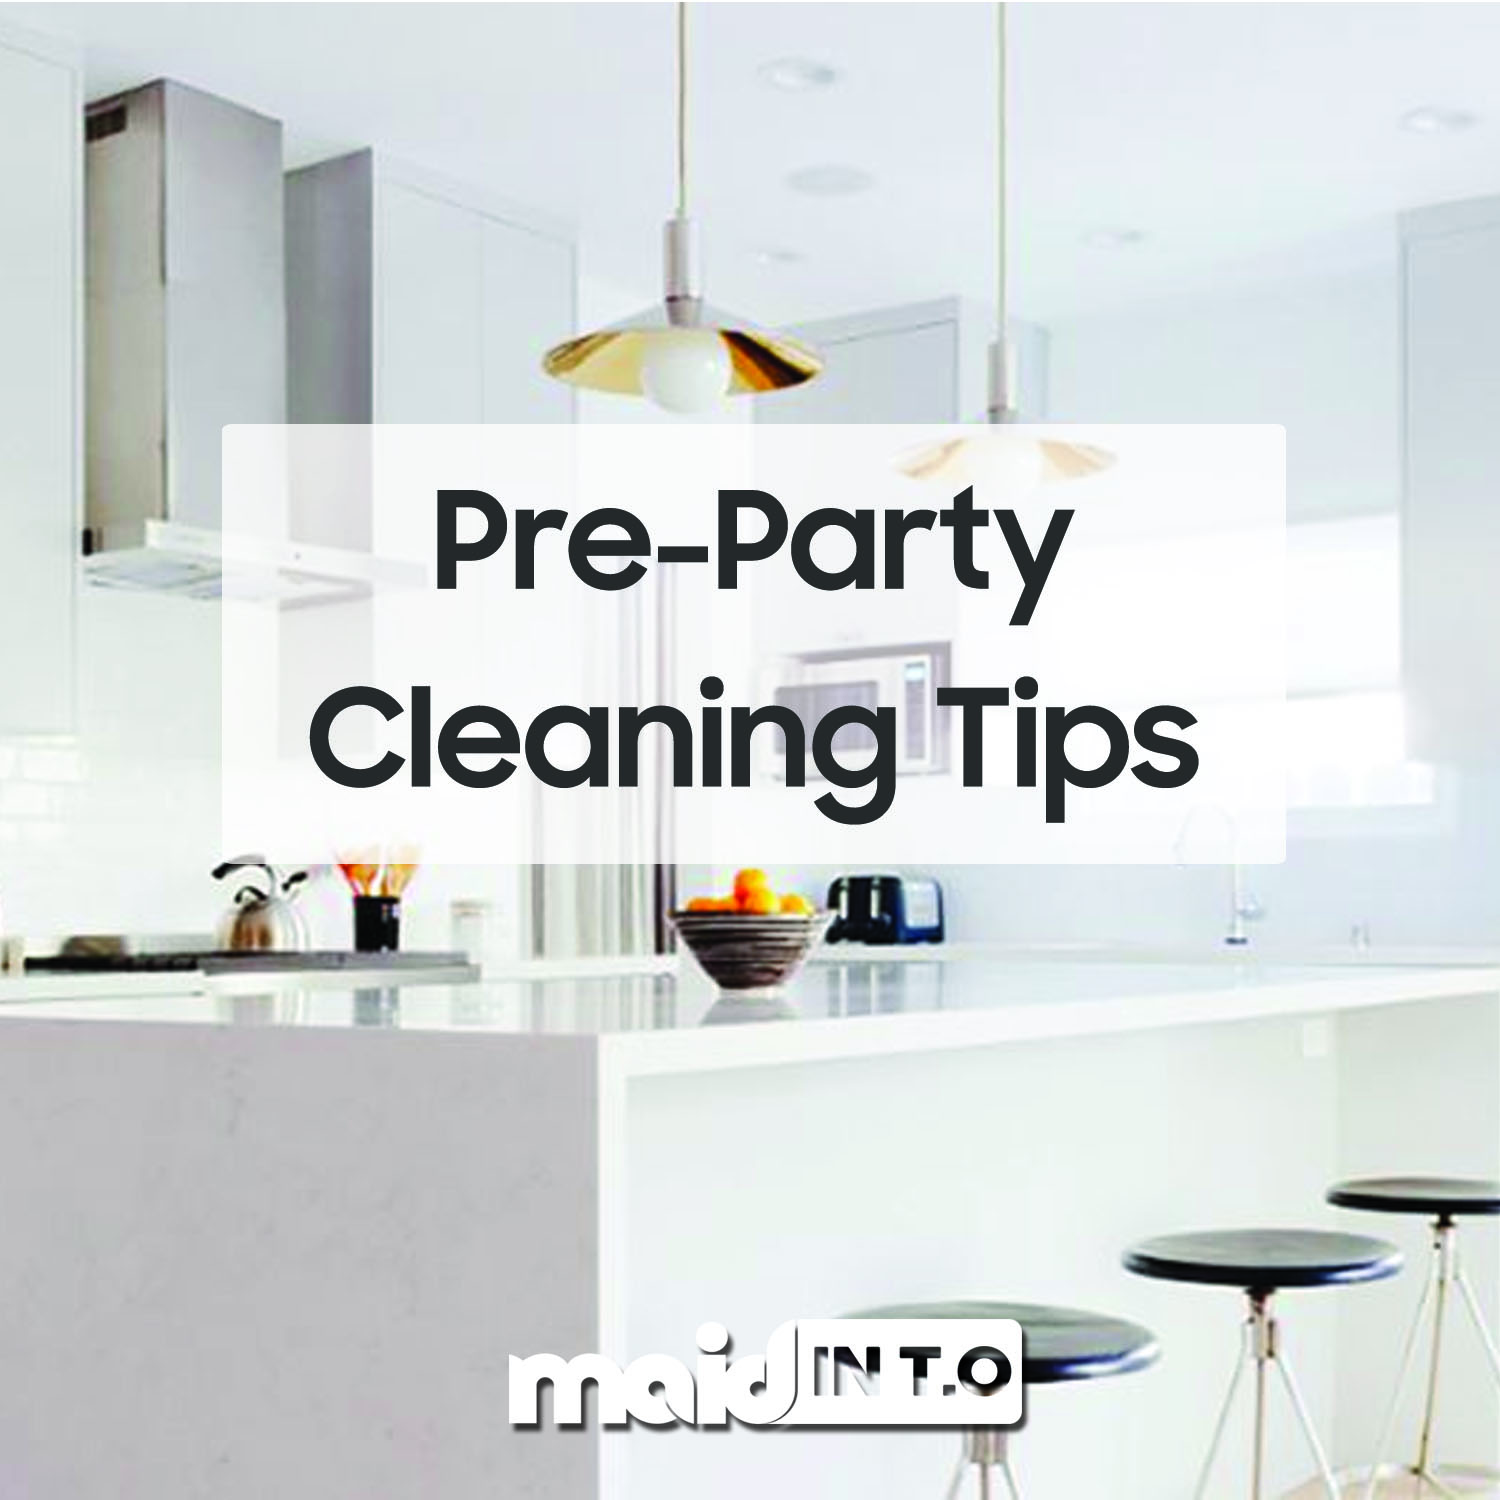 Pre-Party Cleaning Tips